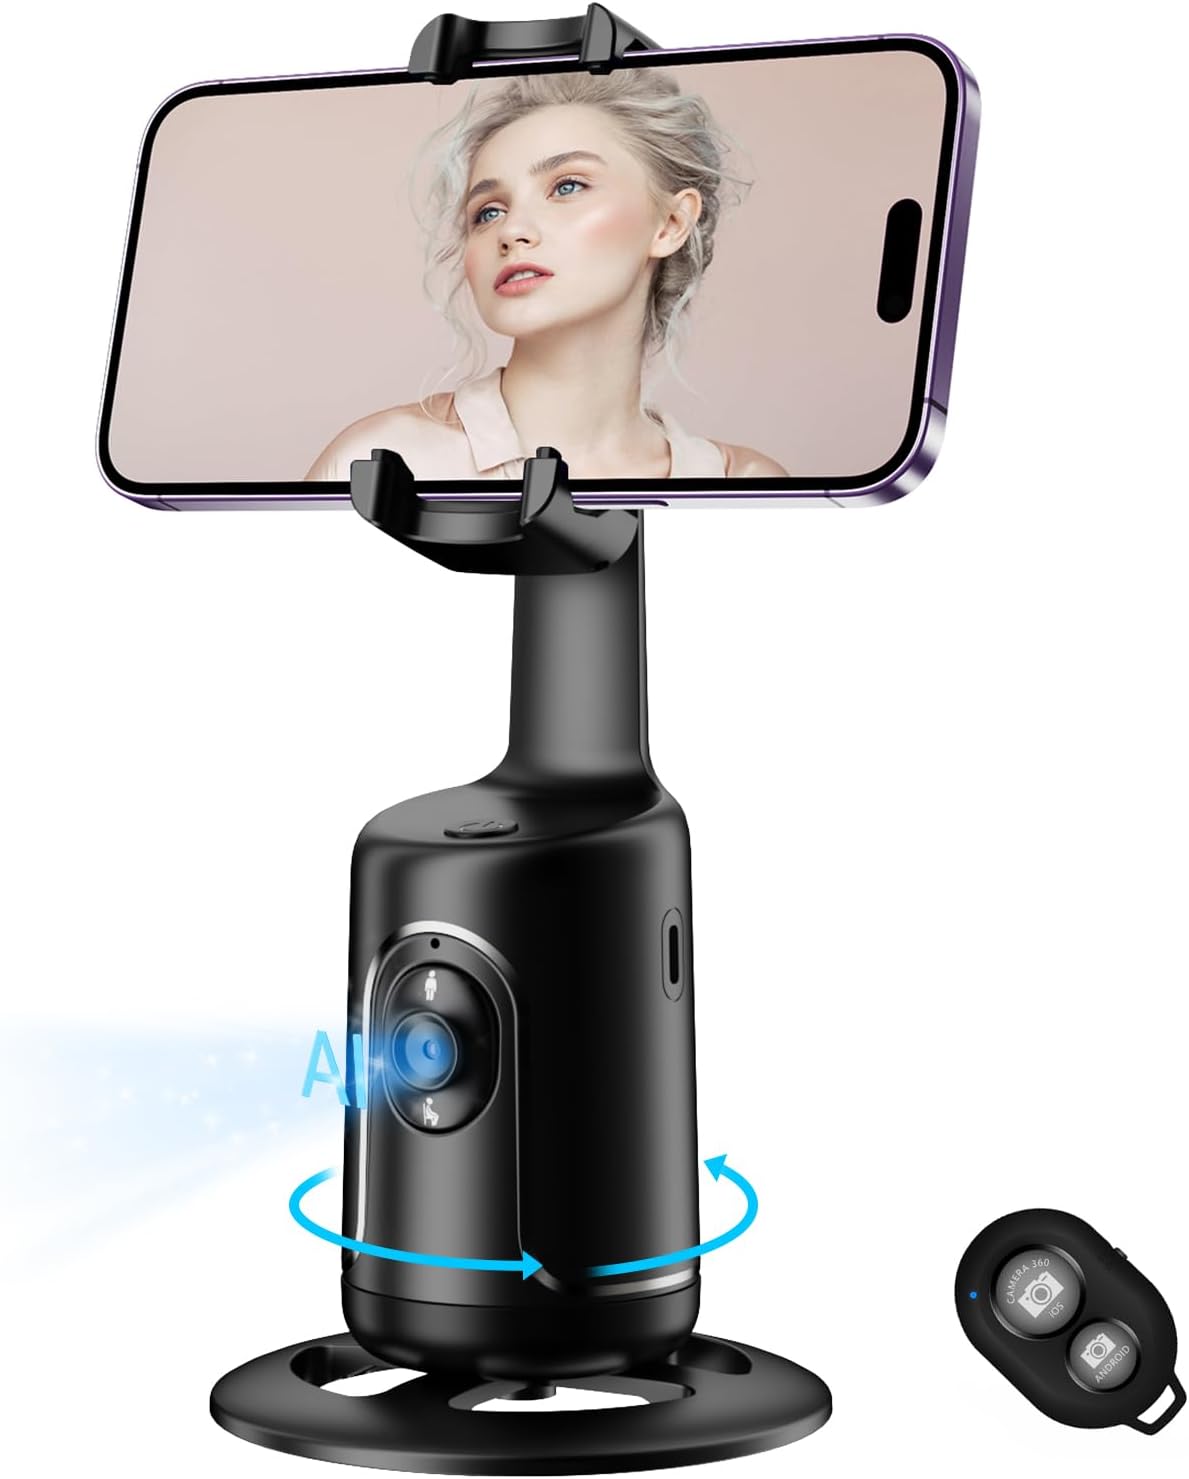 SMART Auto Face Tracking Tripod, No App, 360° Rotation Face Body Phone Camera Mount Gesture Control, Smart Shooting Holder with 3000mAh Rechargeable Battery for Vlog, Streaming, Video, Tiktok- Black (Black)